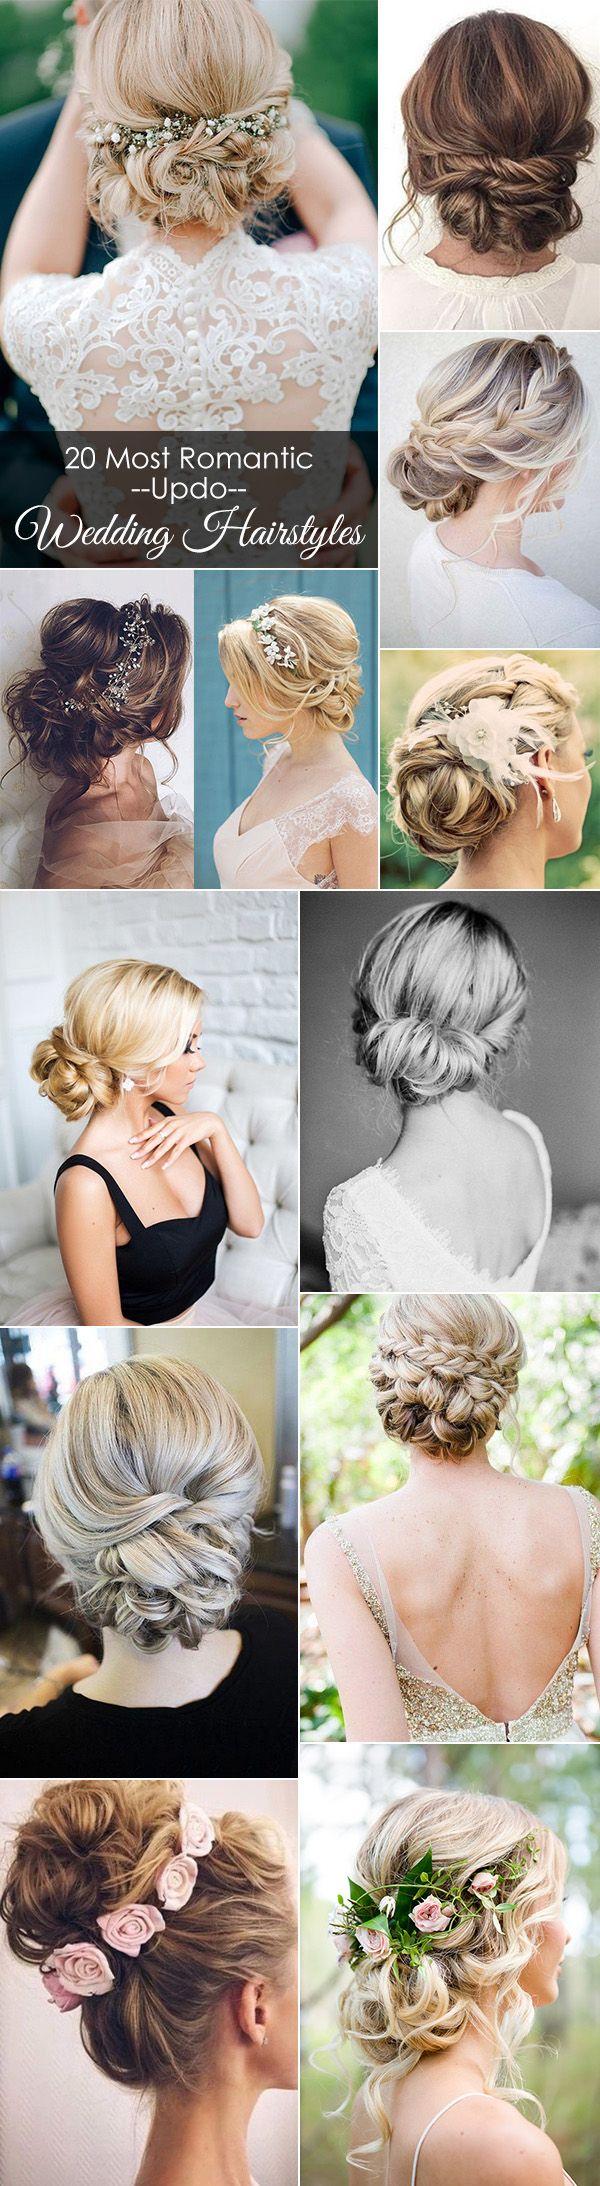 Wedding - 20 Most Romantic Bridal Updos Wedding Hairstyles To Inspire Your Big Day